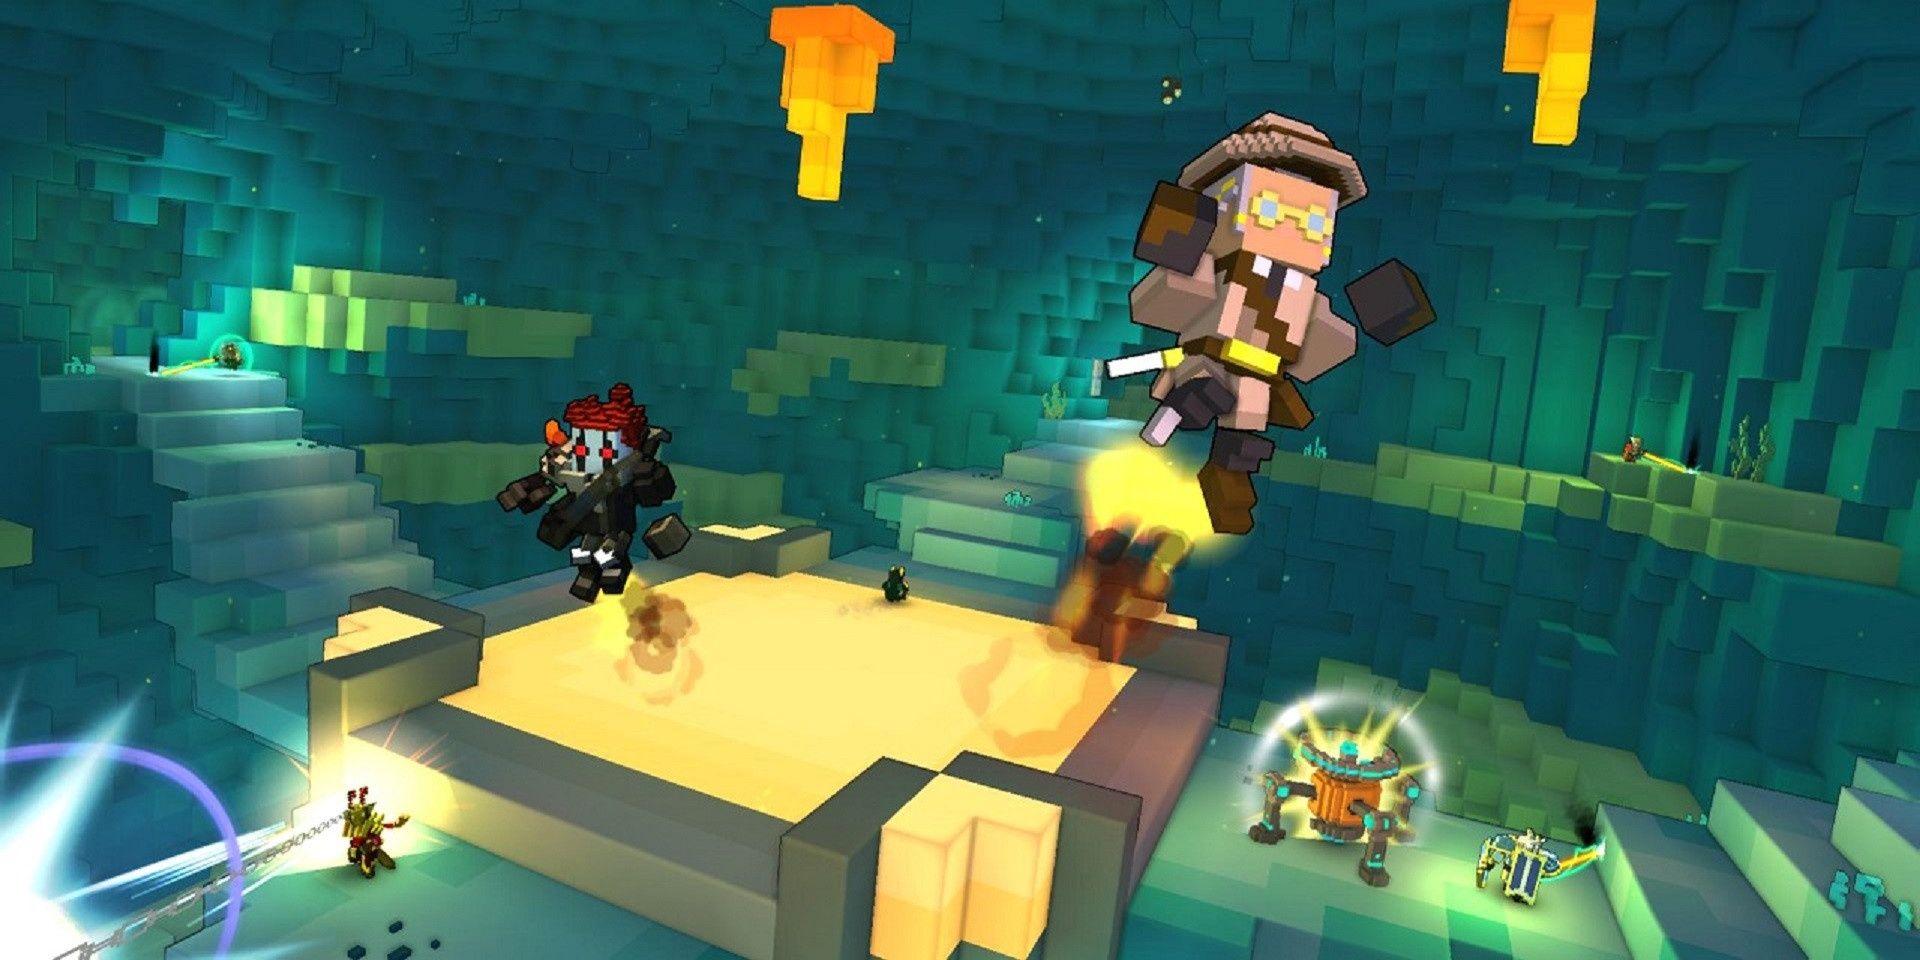 Blocky characters leap from a platform in Trove.